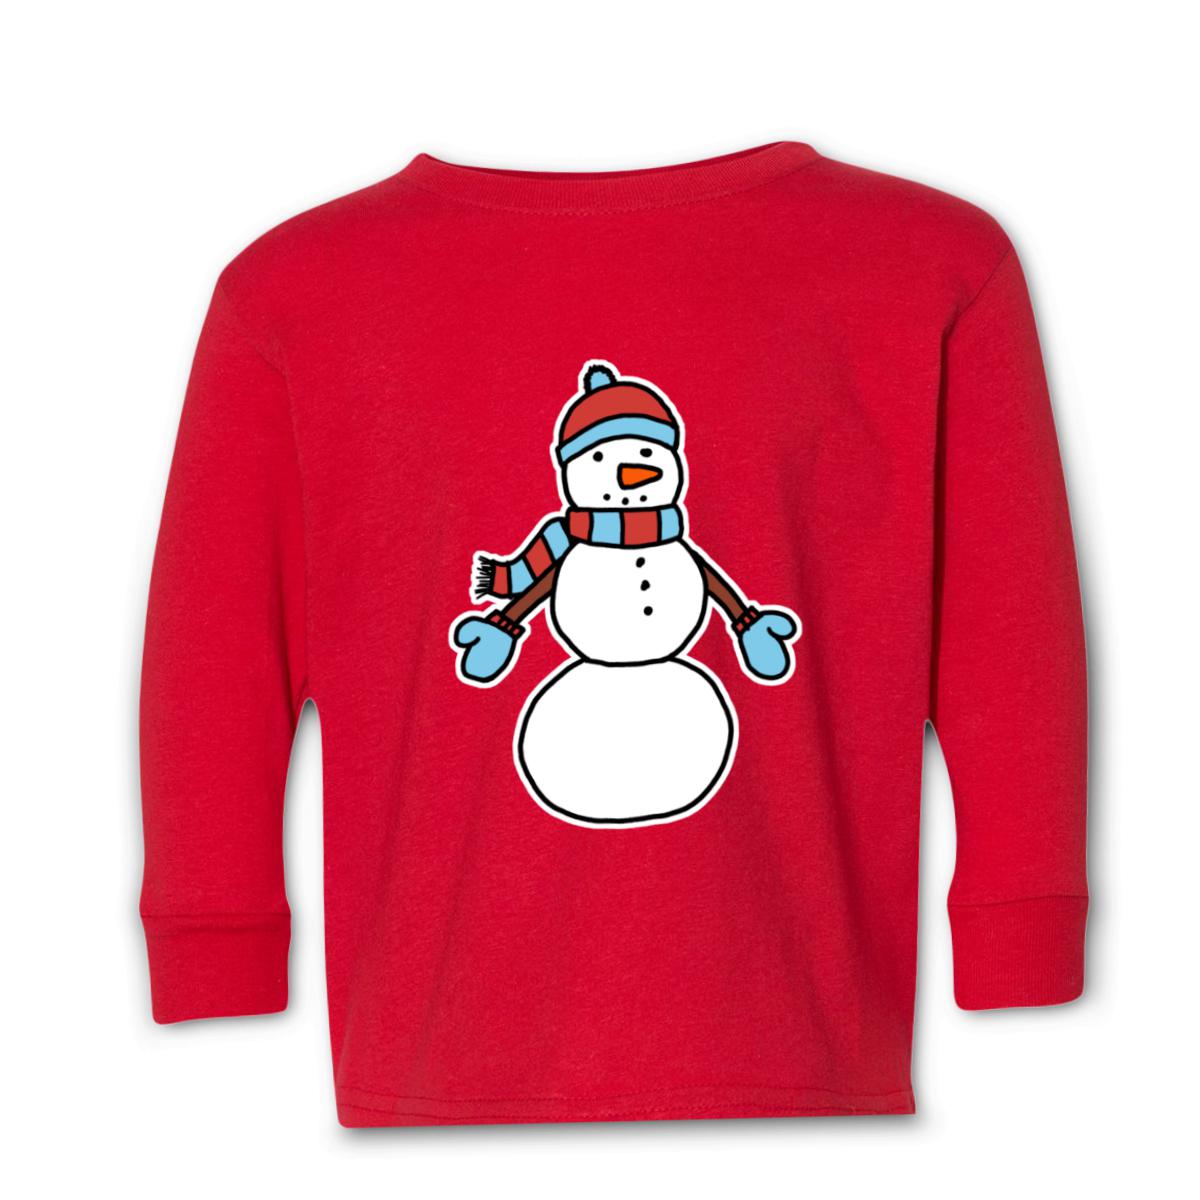 Snowman Bundled Up Kid's Long Sleeve Tee Small red